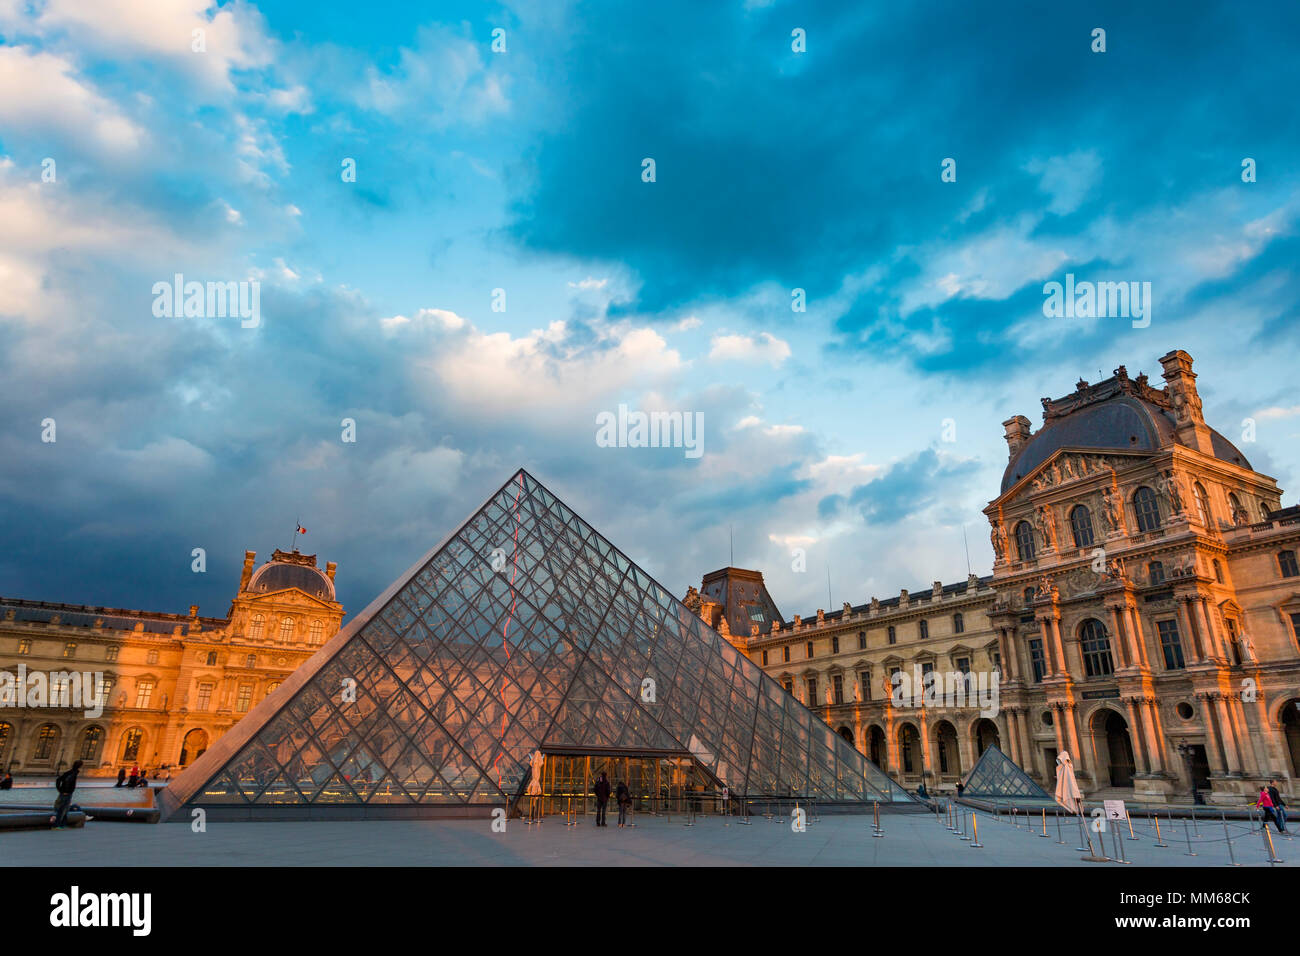 Evening sky at sunset over the courtyard of Musee du Louvre, Paris, France Stock Photo